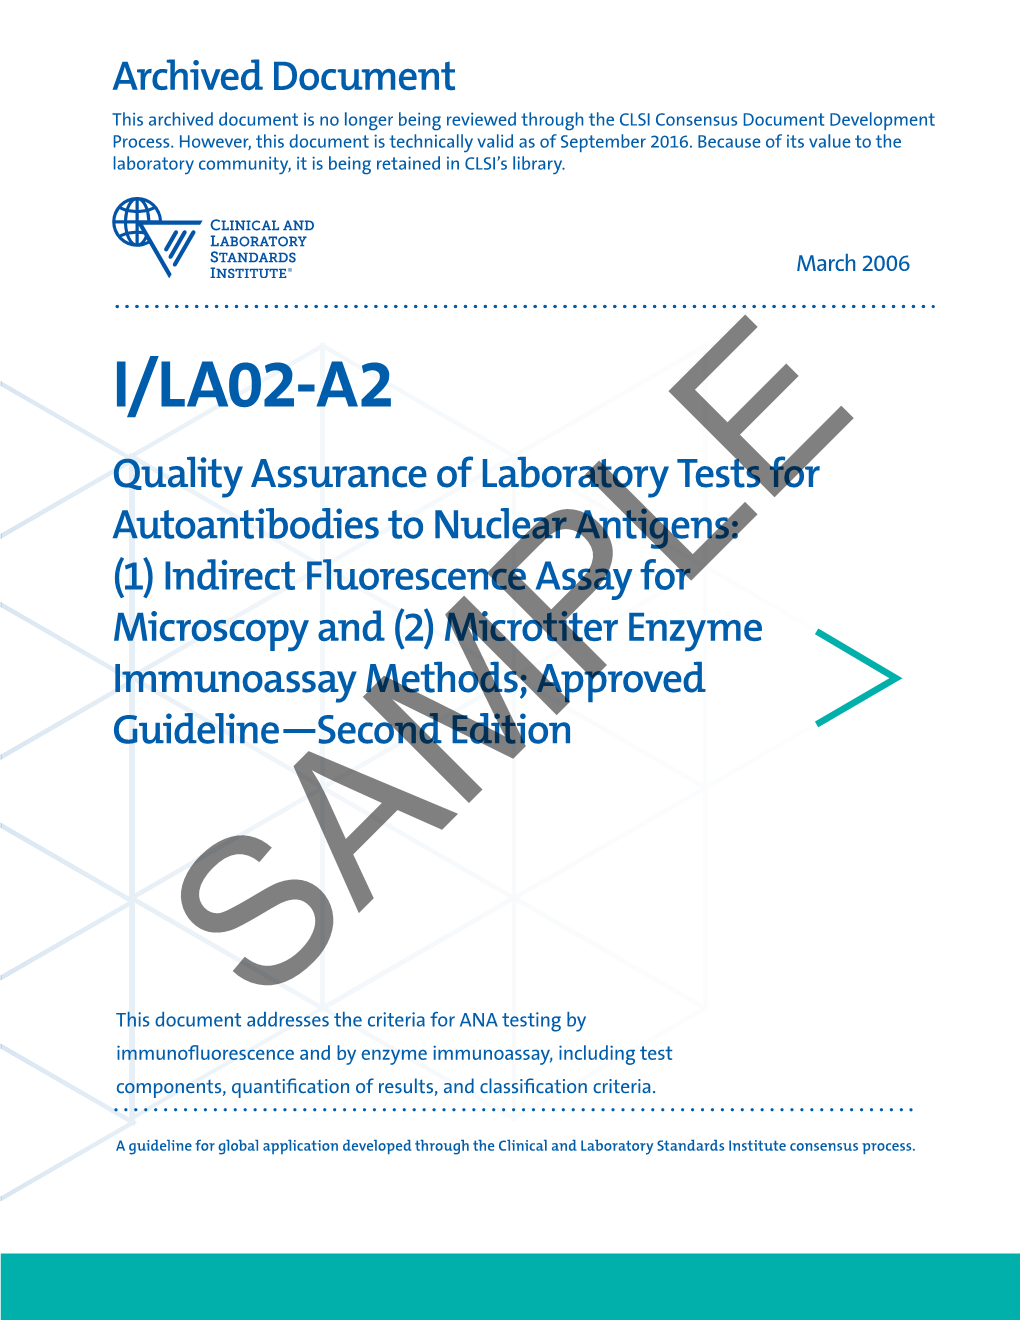 ILA02: Quality Assurance of Laboratory Tests For